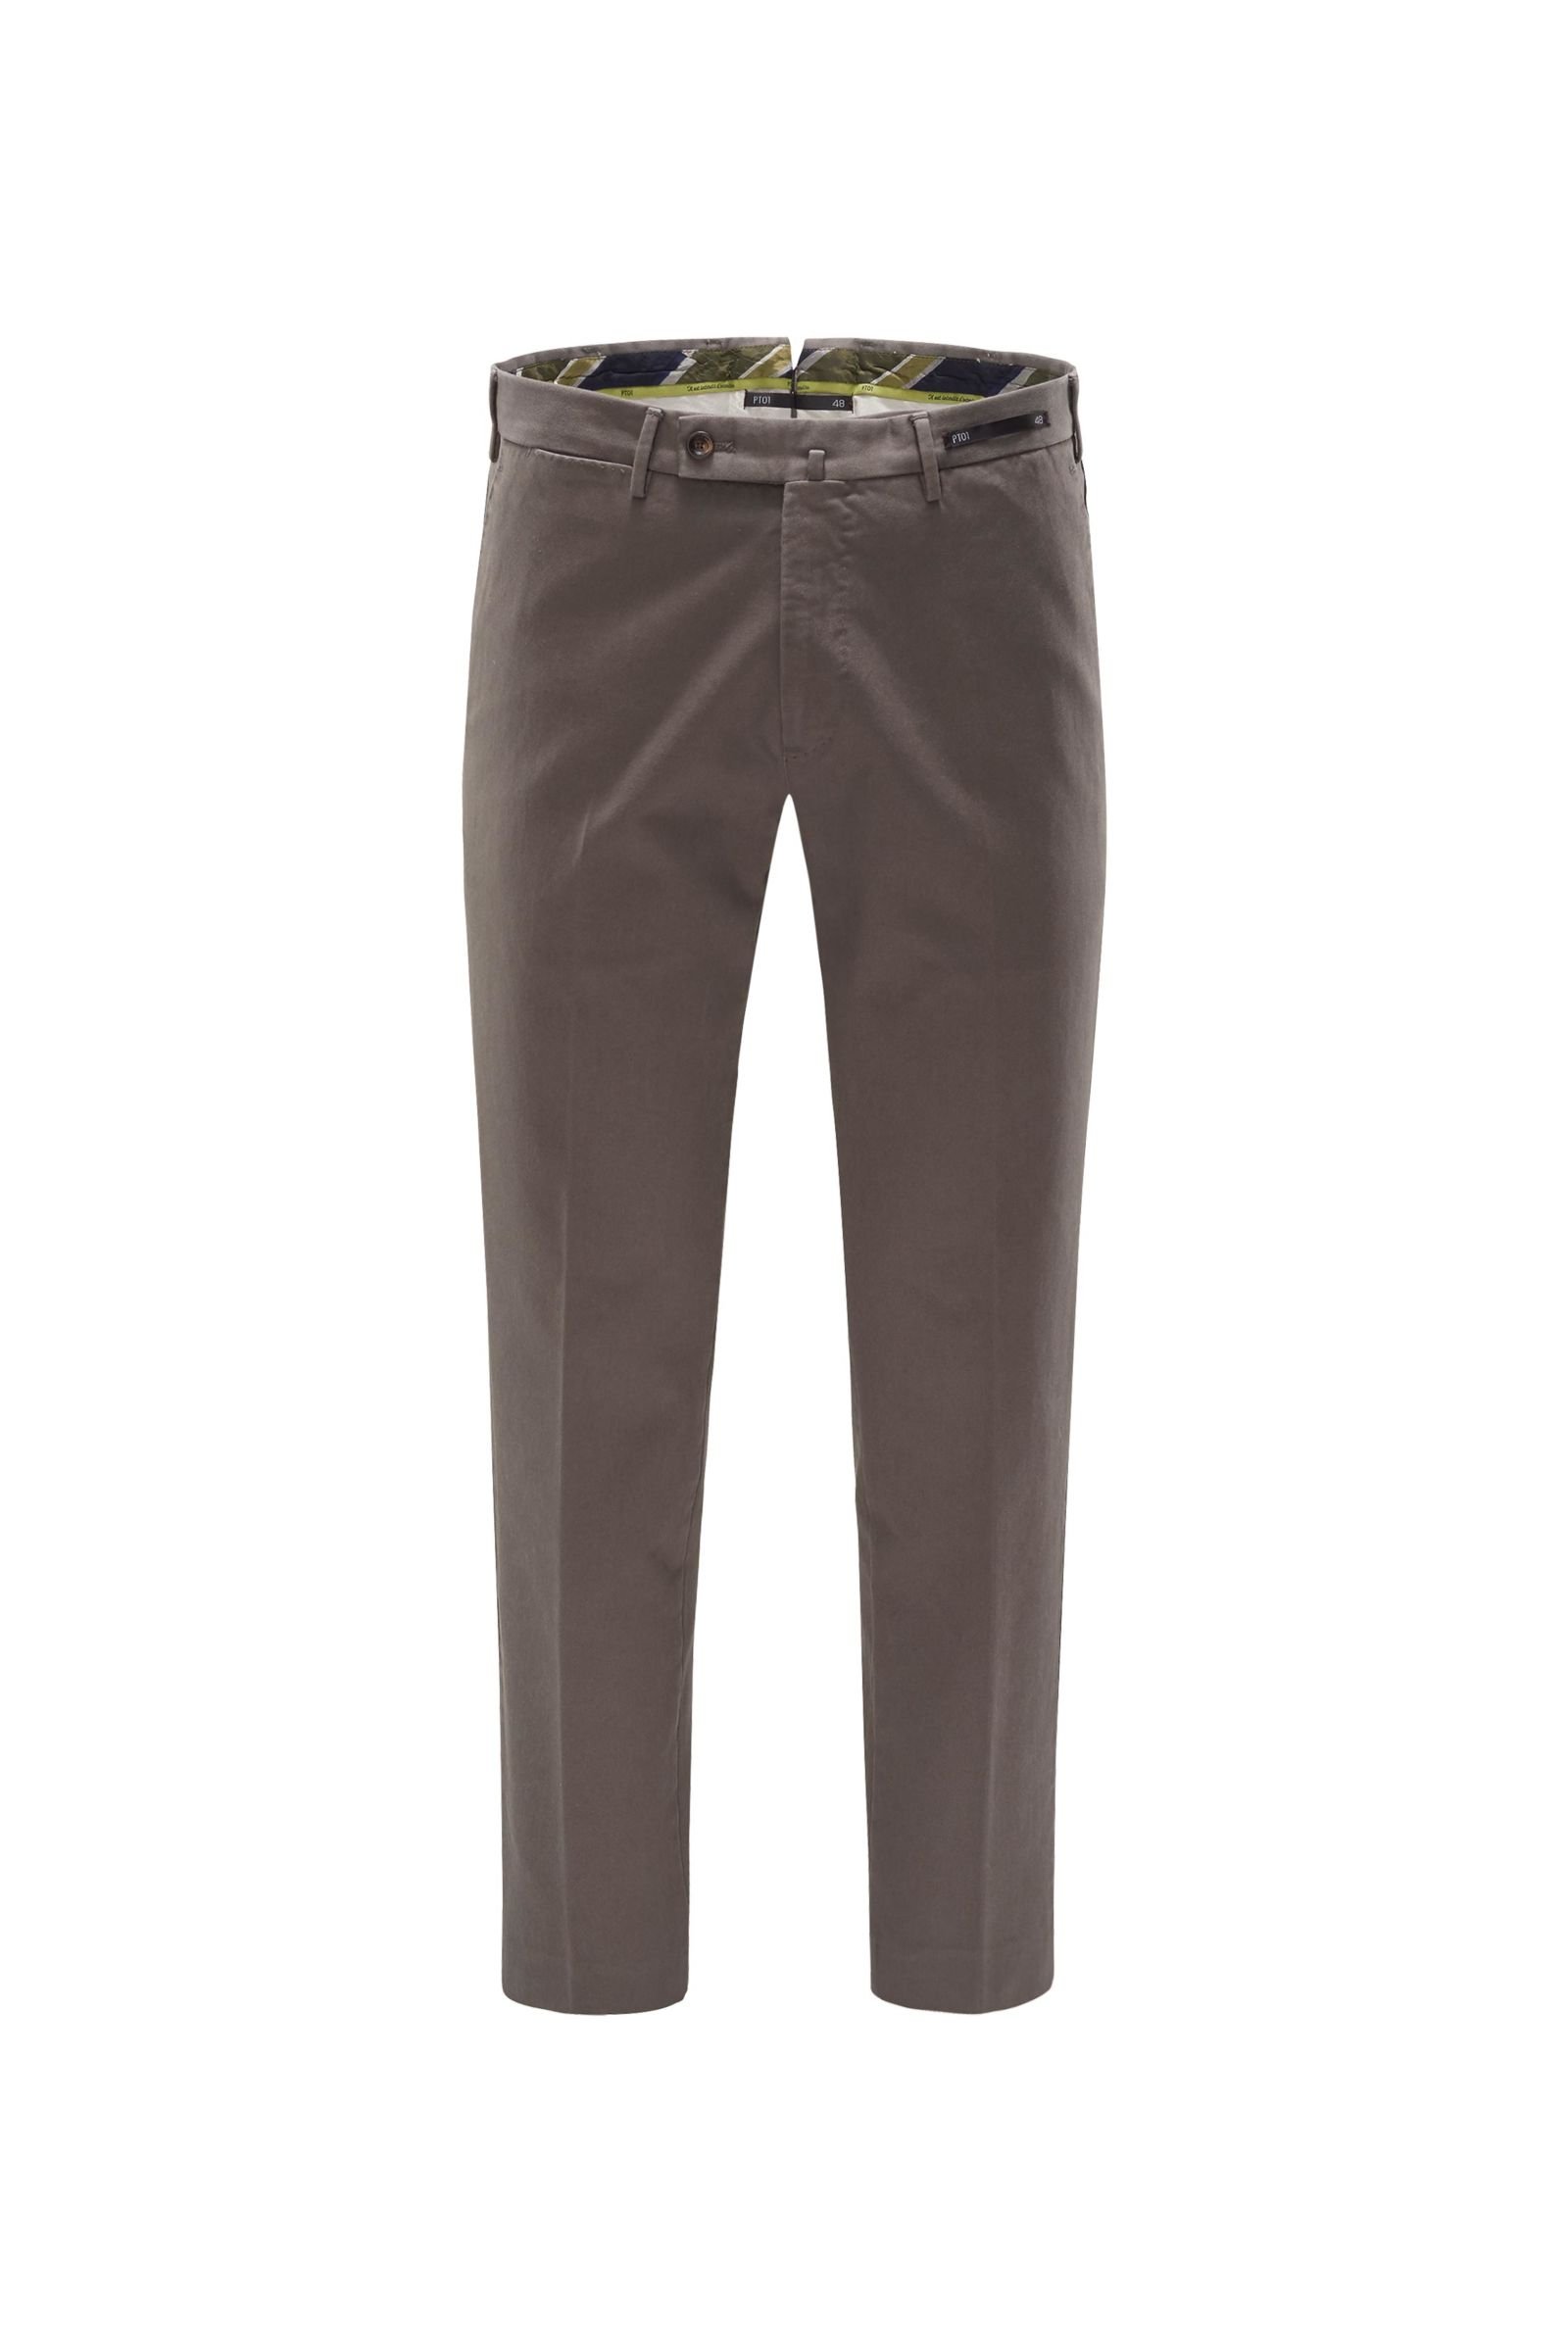 Chinos 'Graven Fit' grey brown